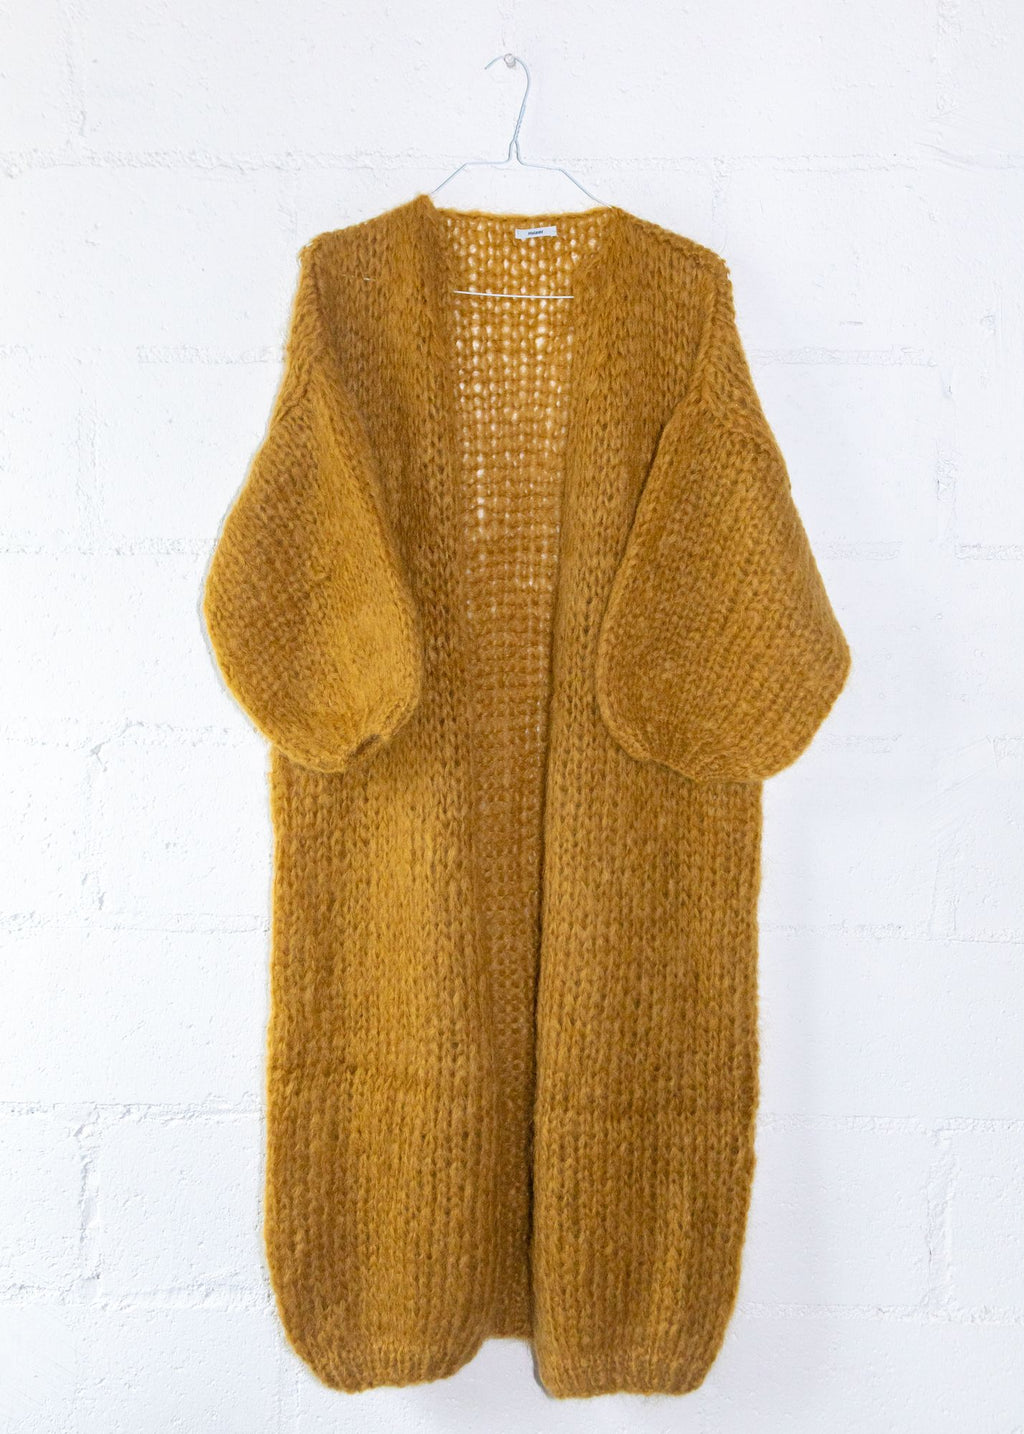 Mohair Big Coat, from Maiami